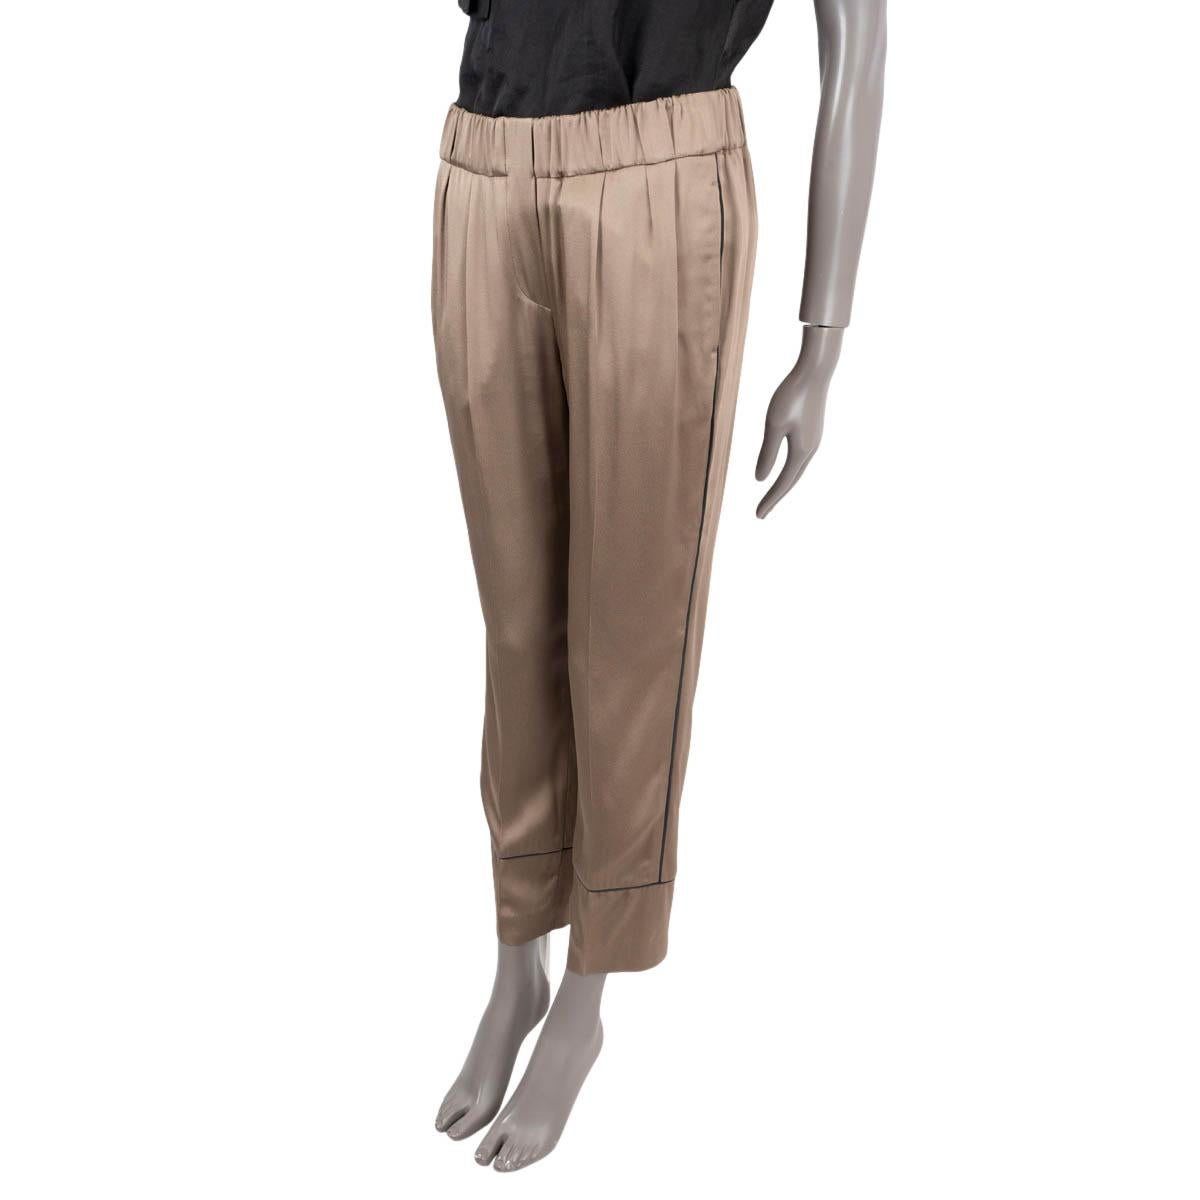 100% authentic Brunello Cucinelli pants in taupe and black acetate (61%) and viscose (39%). Features an elastic waistband, straight-leg and pockets on the side and back. Unlined. Have been worn and are in excellent